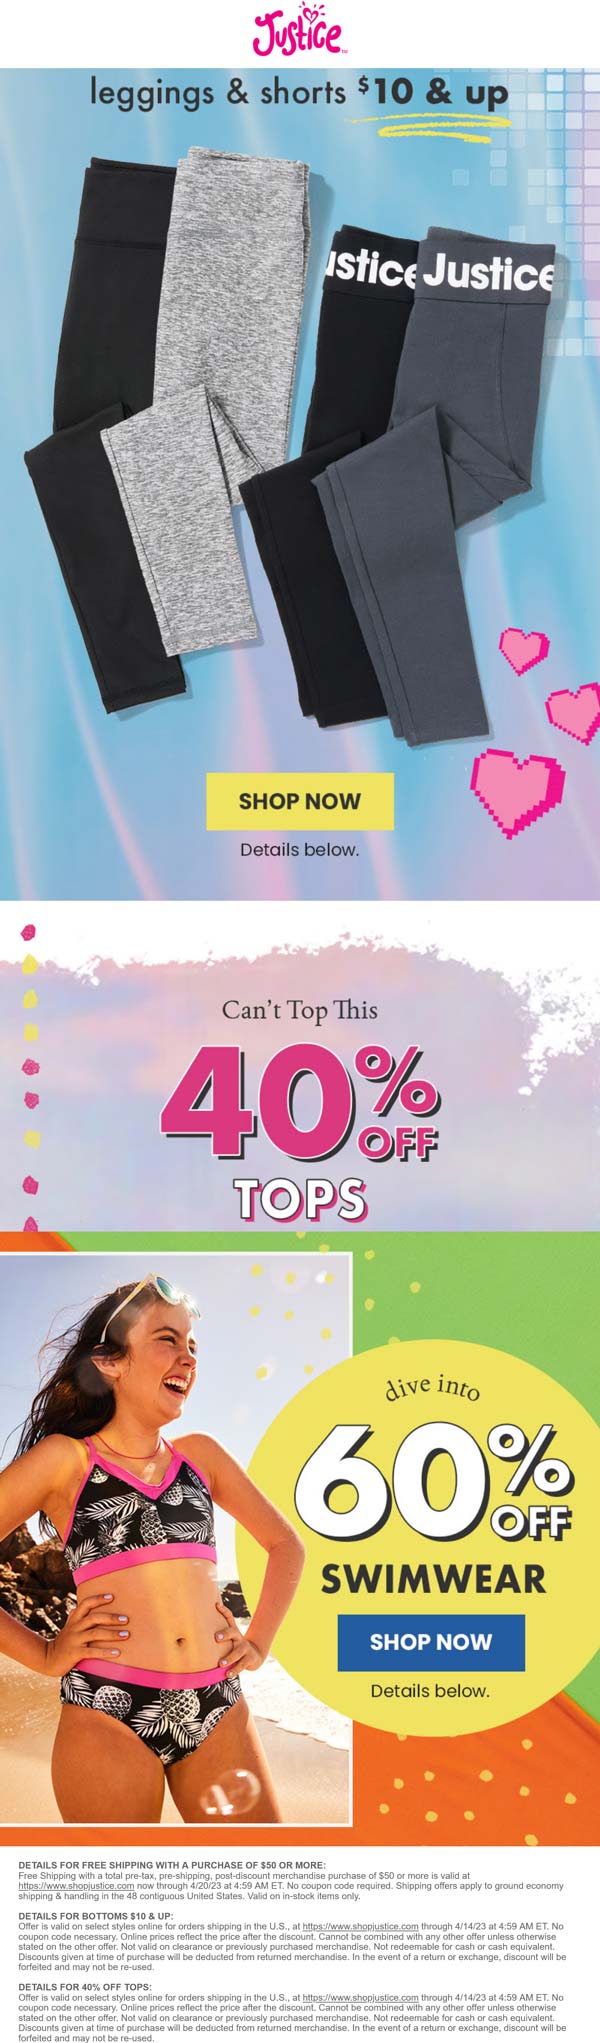 Justice stores Coupon  40% off tops & 60% off swimwear online at Justice #justice 